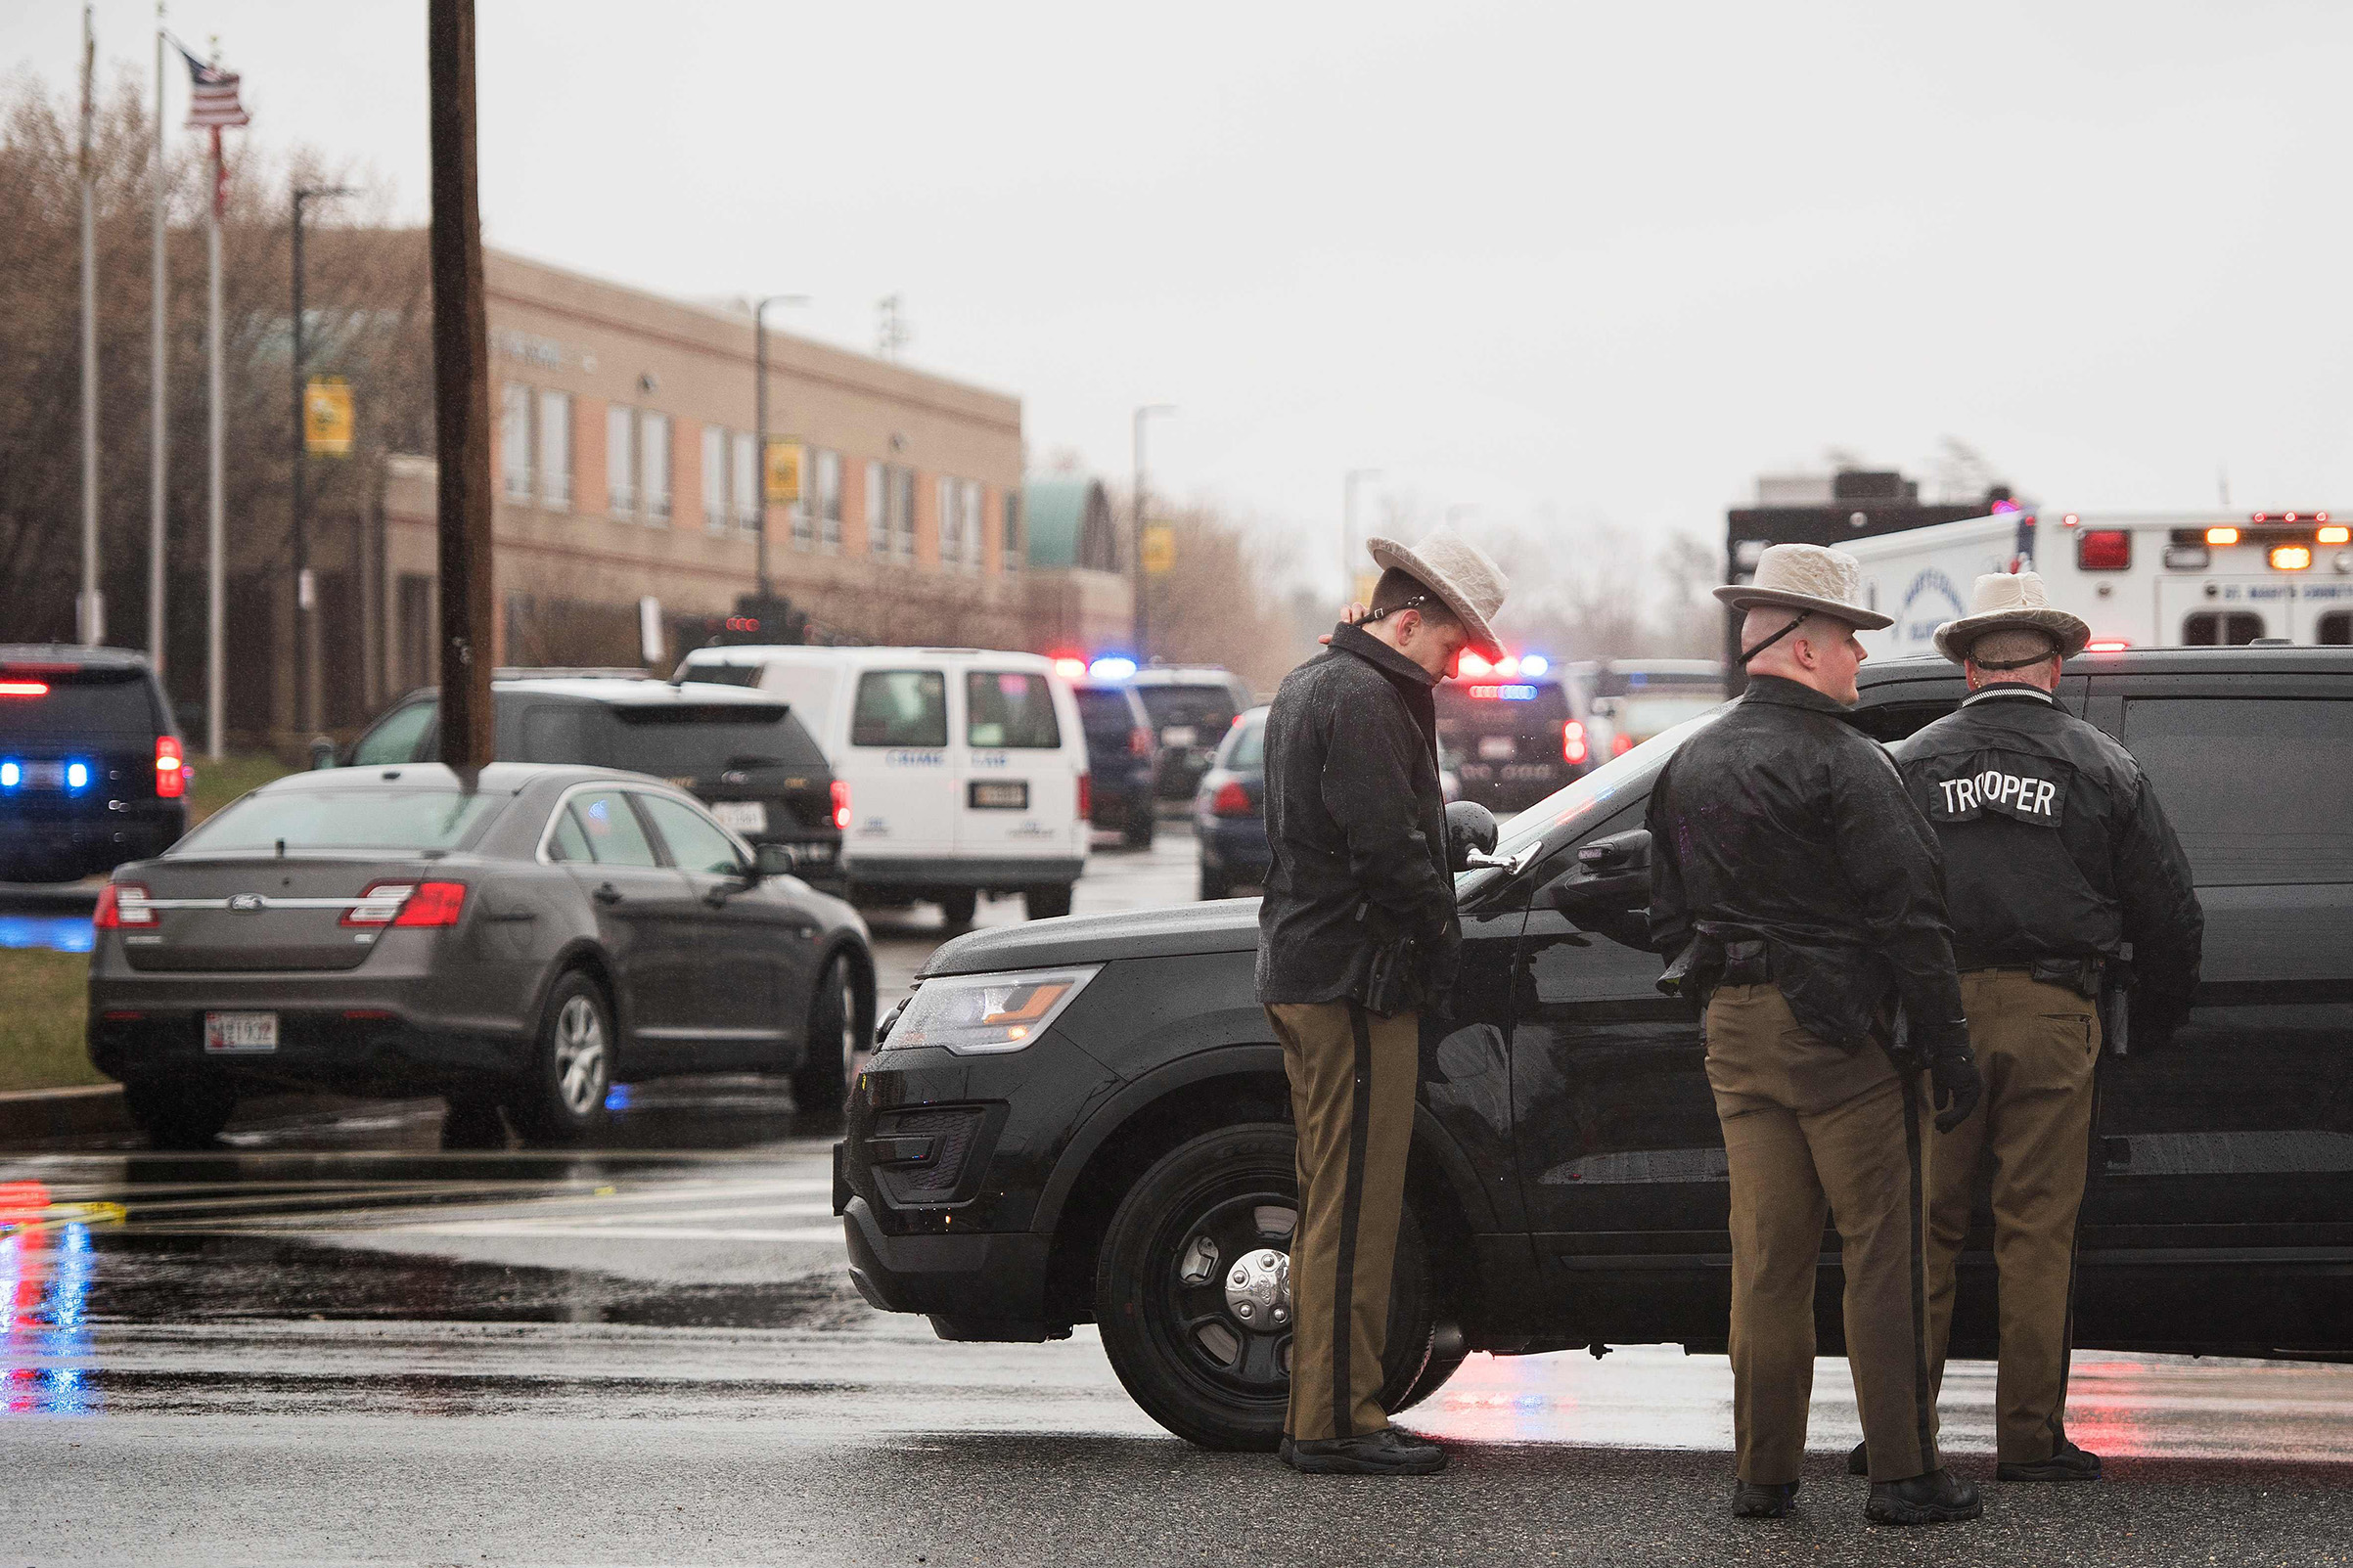 Maryland State Troopers gather on March 20, 2018 at Great Mills High School in Great Mills, Maryland after a shooting at the school. (Jim Watson—AFP/Getty Images)